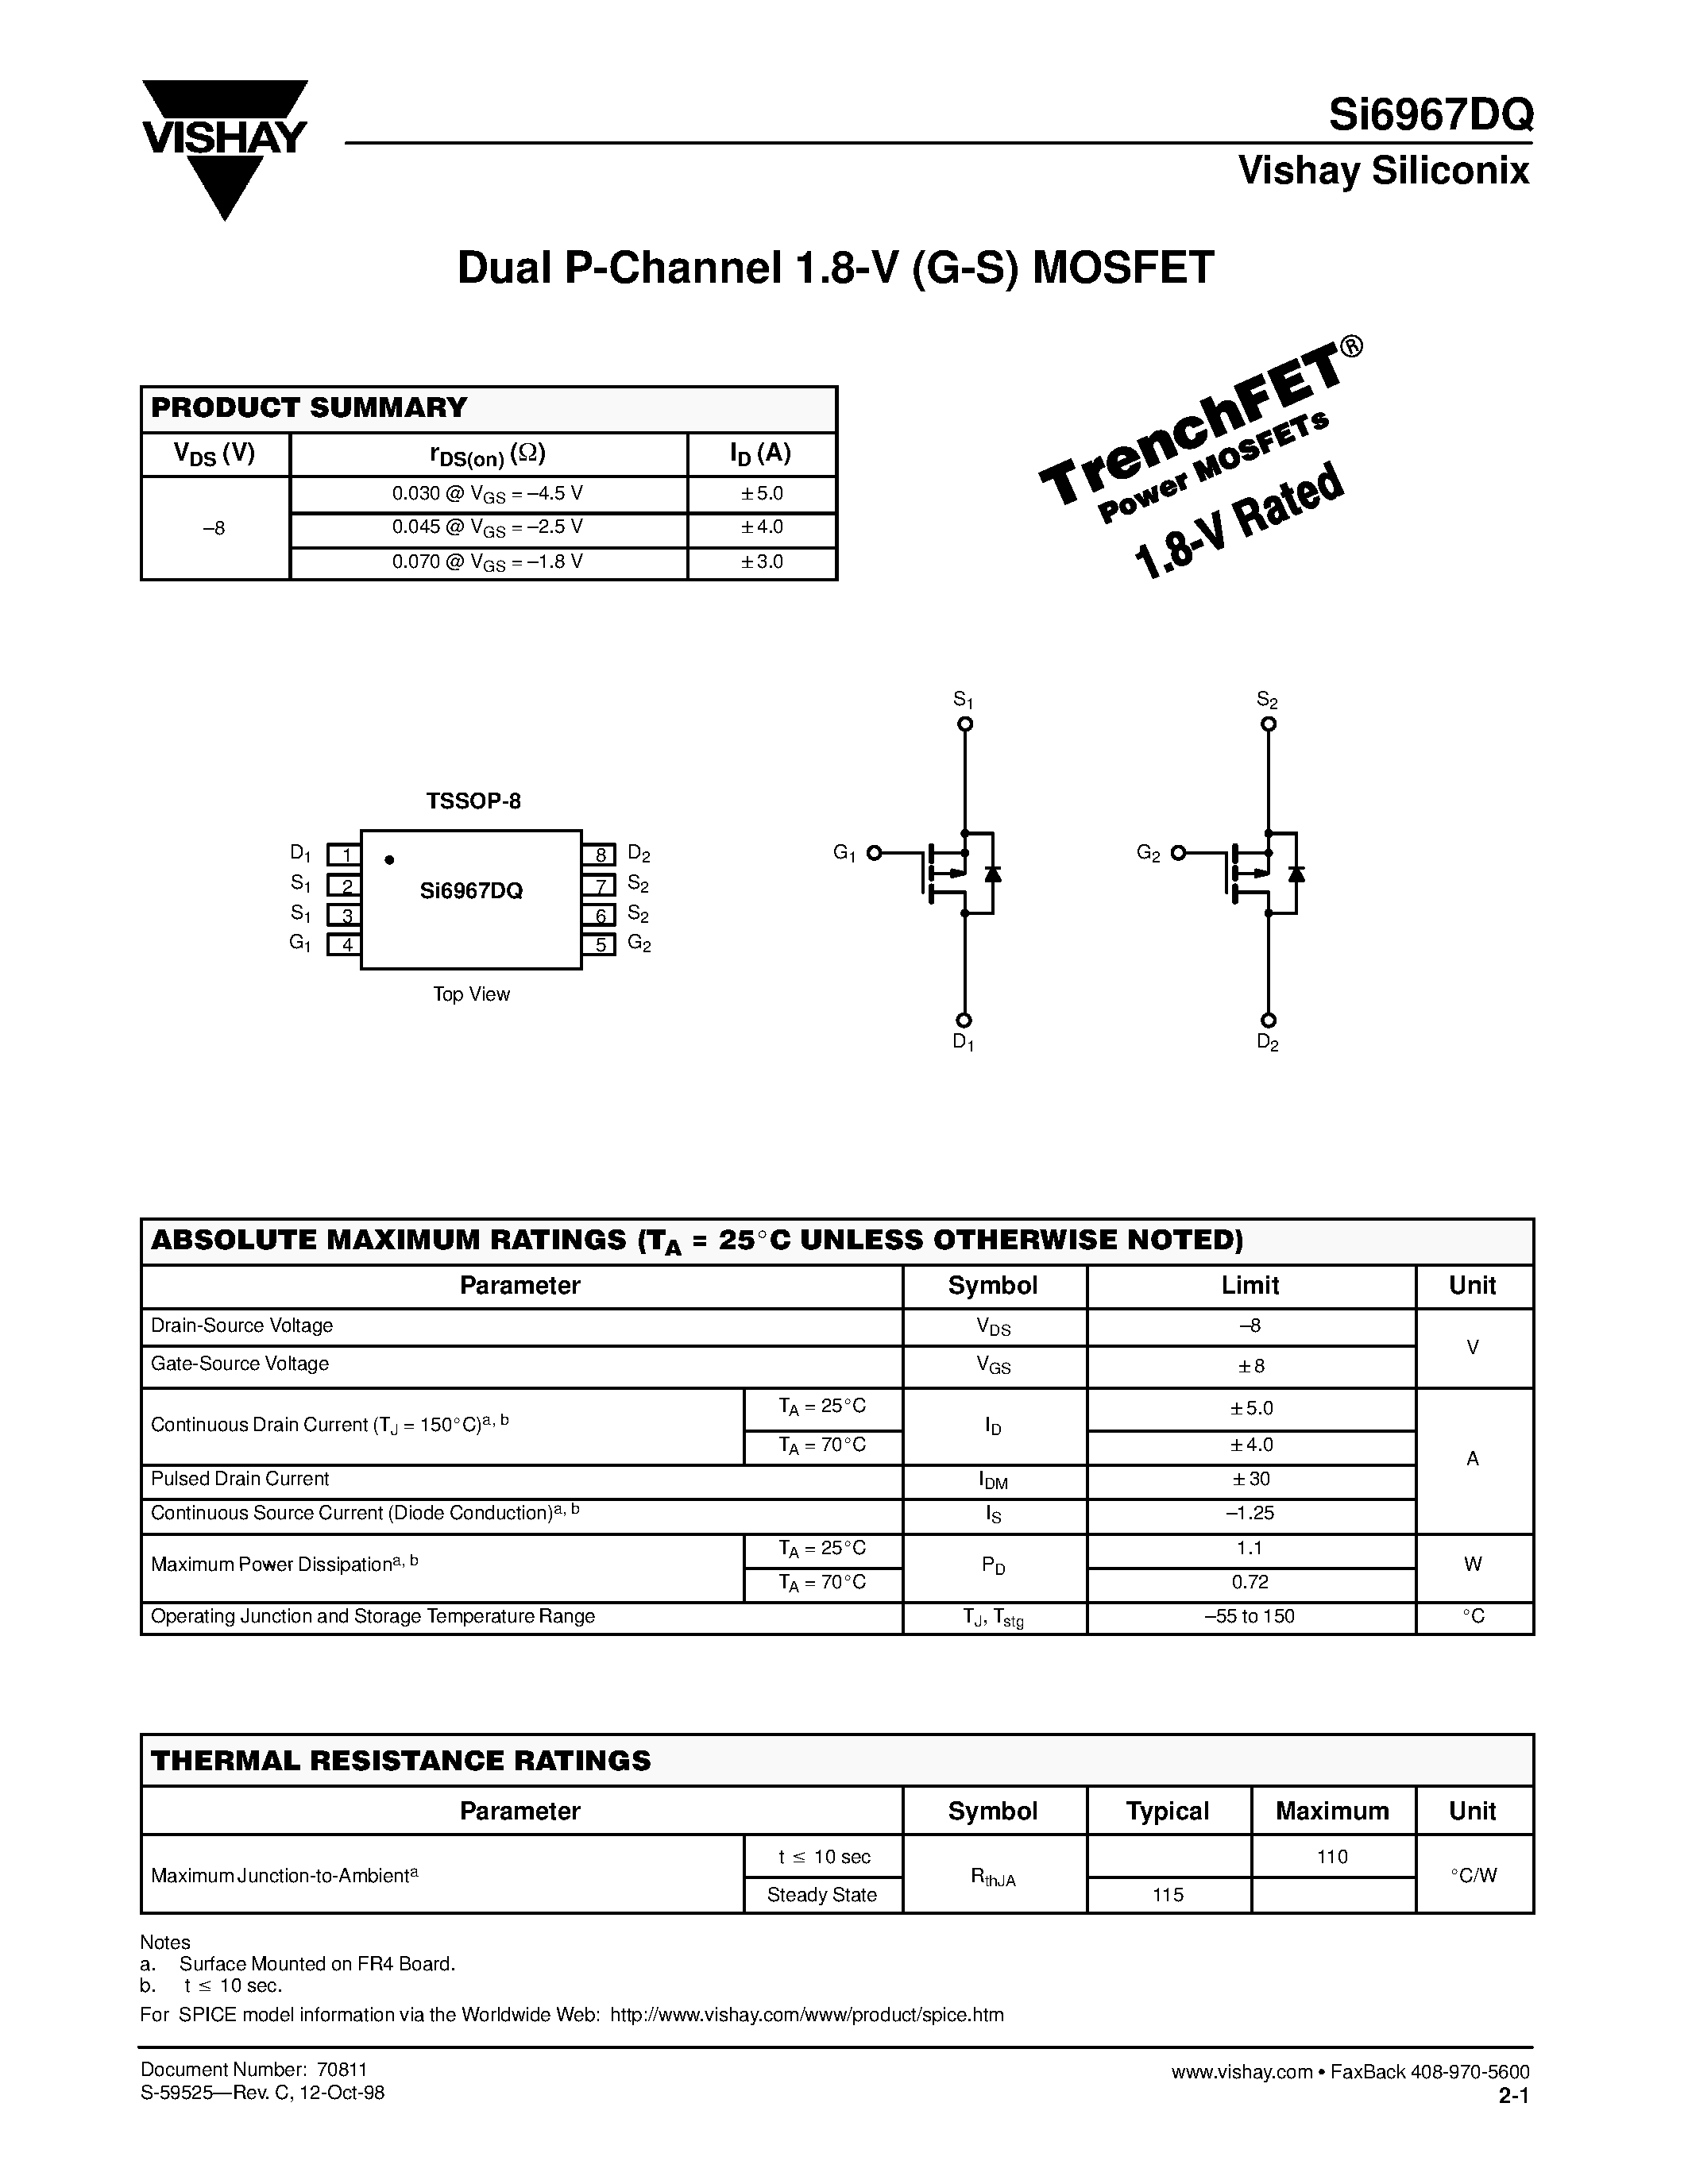 Даташит SI6967DQ - Dual P-Channel 1.8-V (G-S) MOSFET страница 1